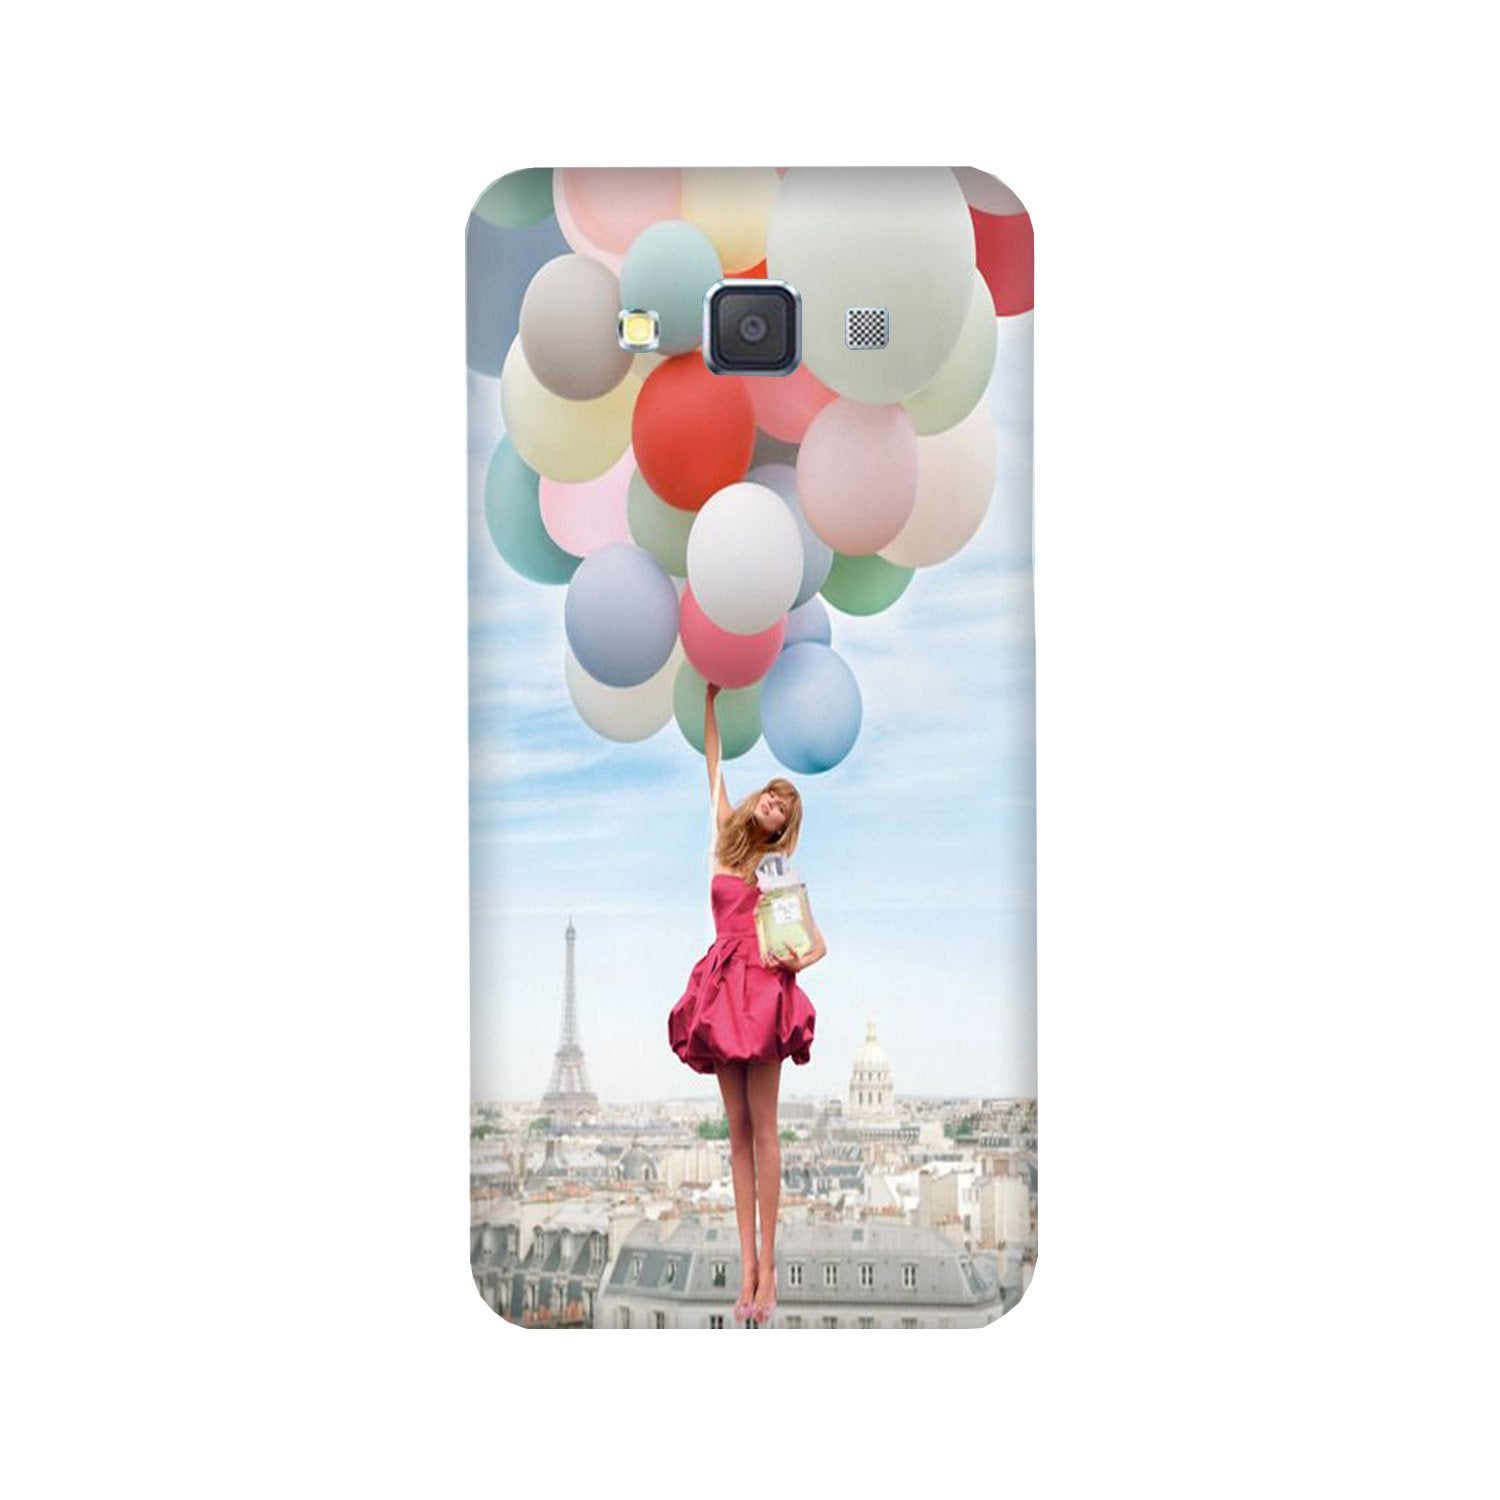 Girl with Baloon Case for Galaxy Grand Max